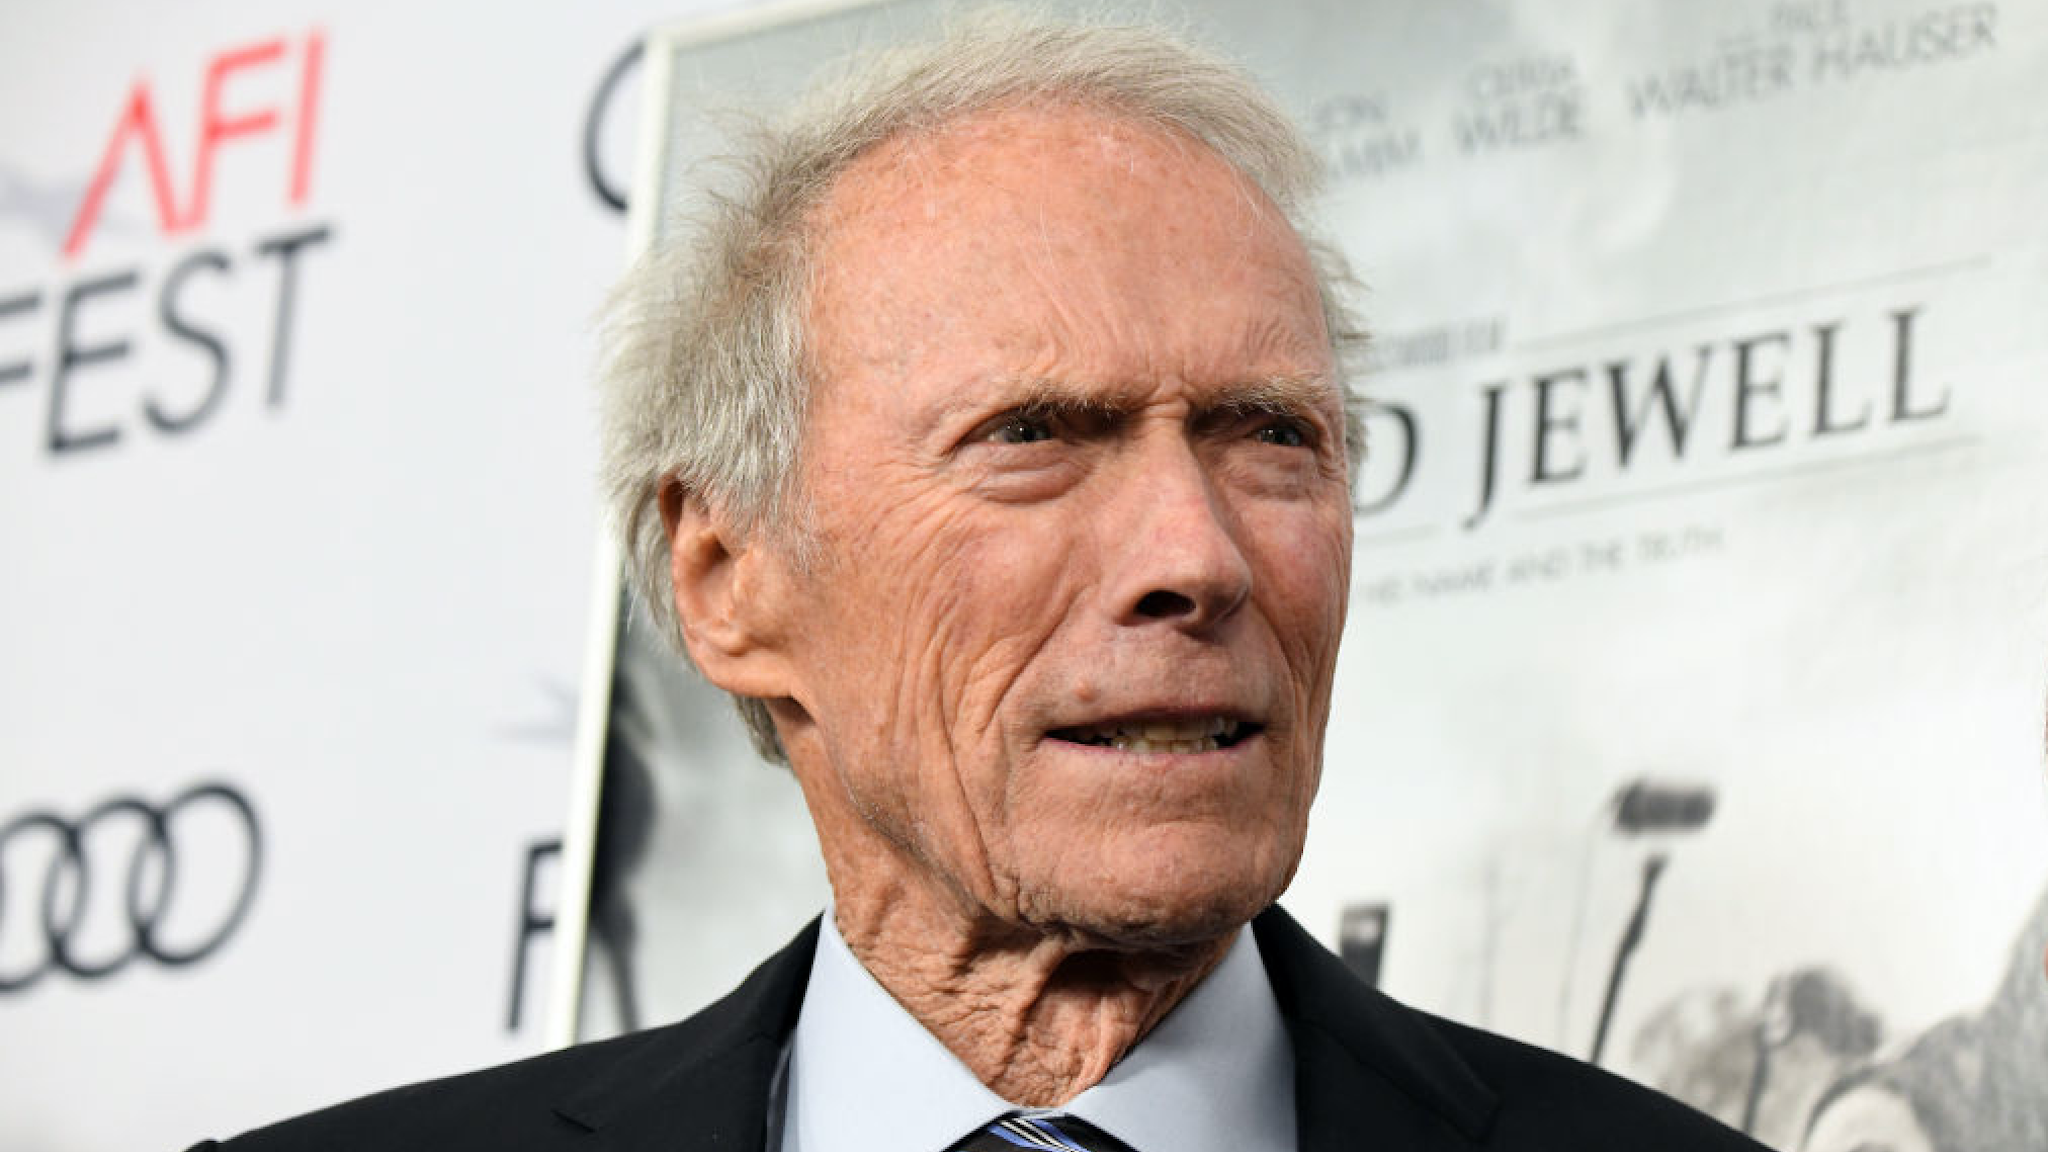 Clint Eastwood attends the "Richard Jewell" premiere during AFI FEST 2019 Presented By Audi at TCL Chinese Theatre on November 20, 2019 in Hollywood, California.